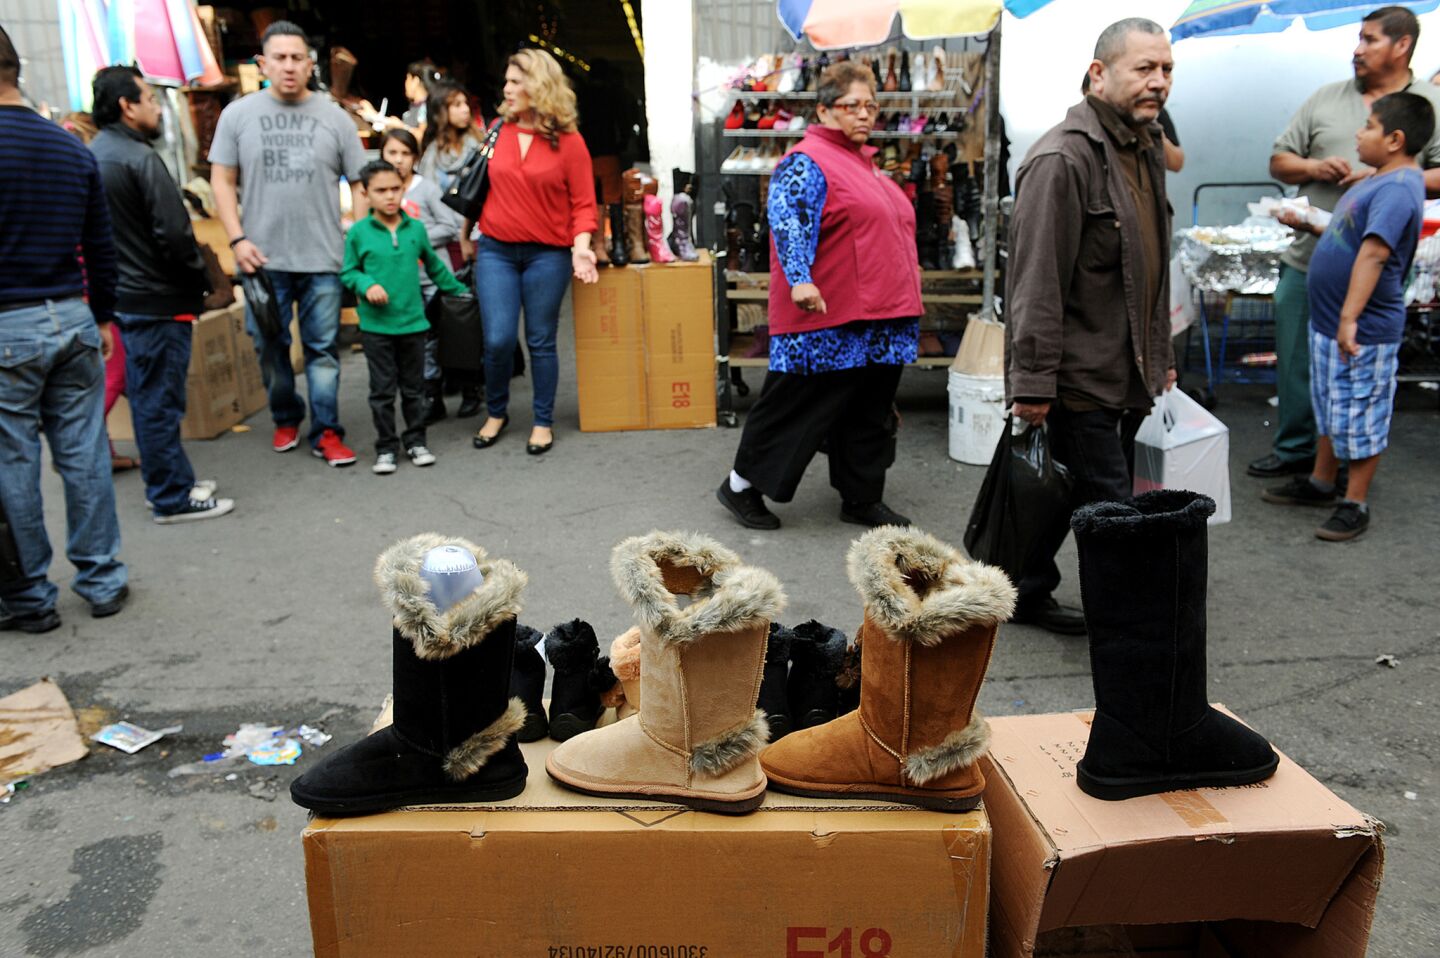 Downtown shoppers pass by boots on display. As more shoppers head downtown for bargains, more street vendors show up to offer them food and drink.